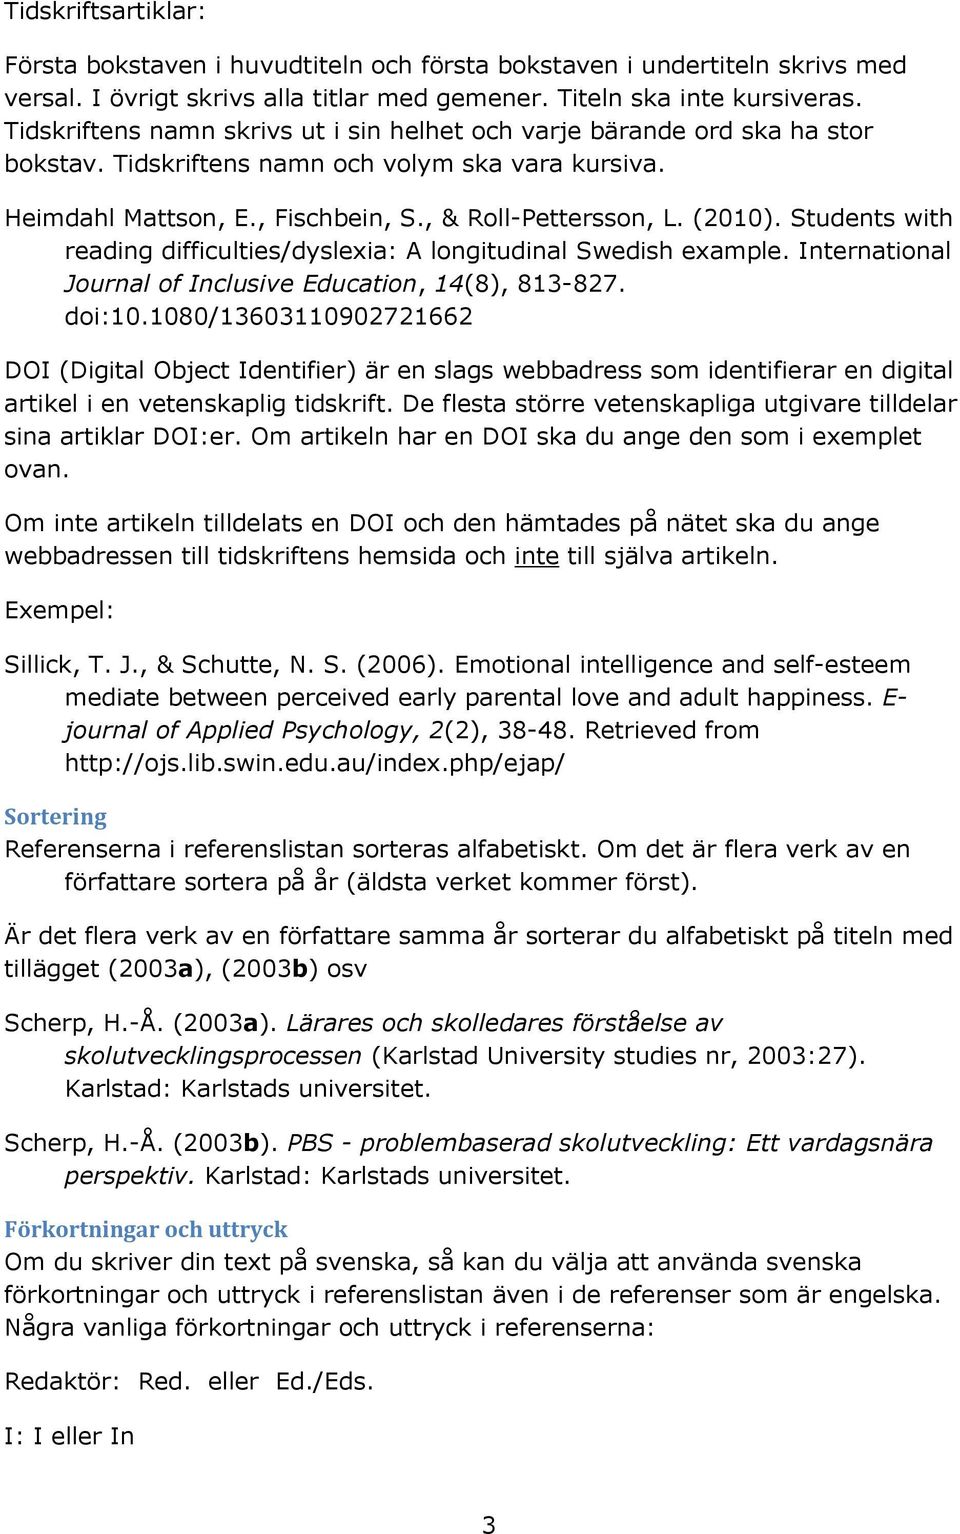 Students with reading difficulties/dyslexia: A longitudinal Swedish example. International Journal of Inclusive Education, 14(8), 813-827. doi:10.